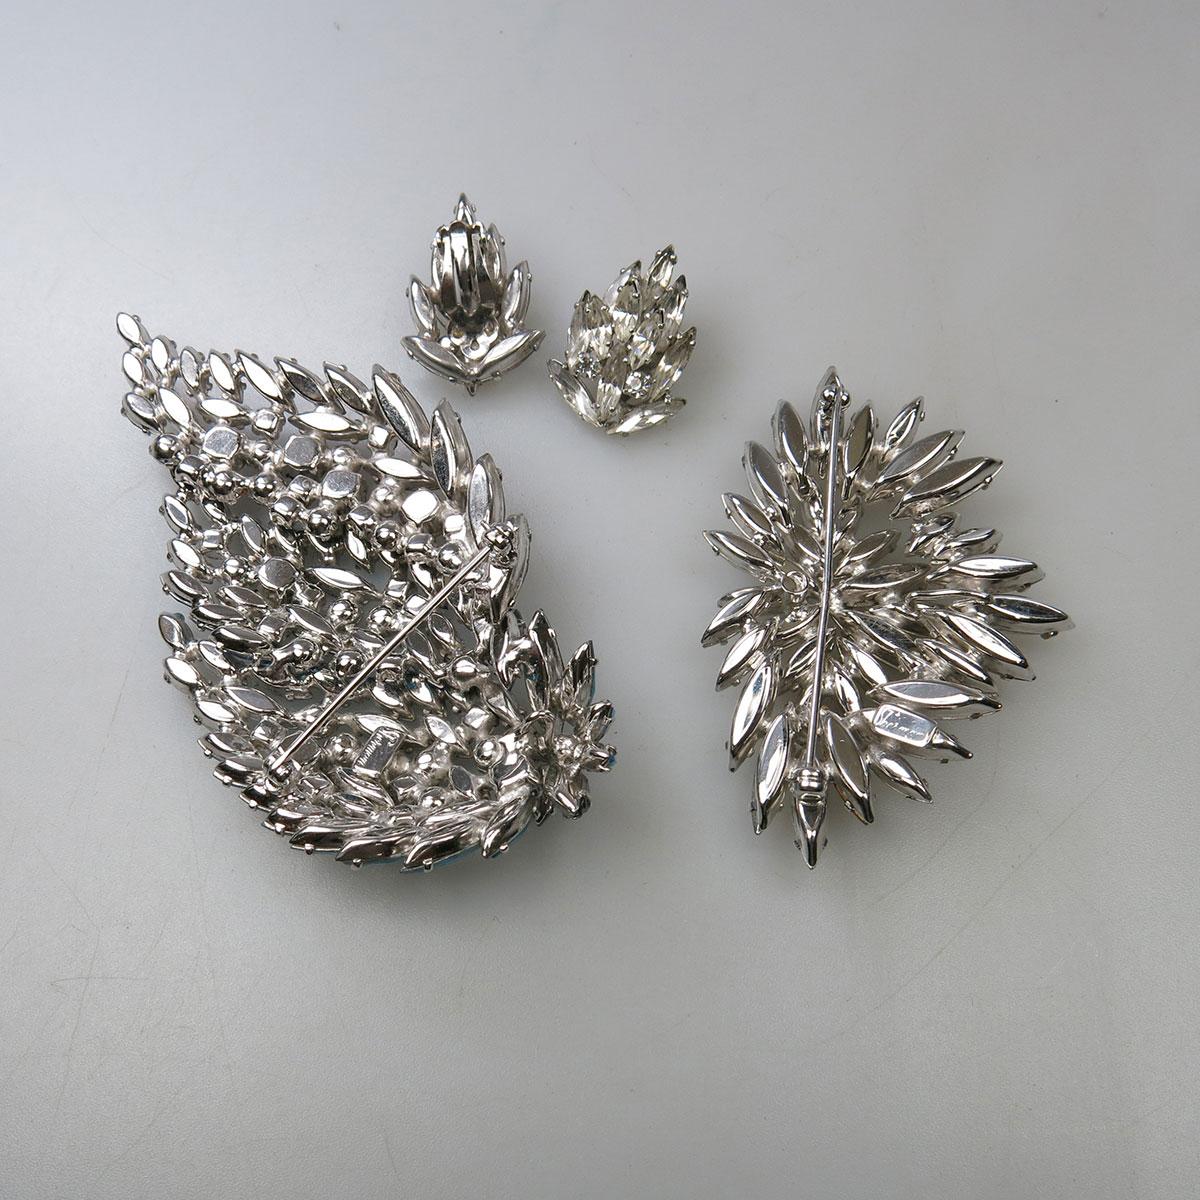 Two Sherman Silver Metal Brooches